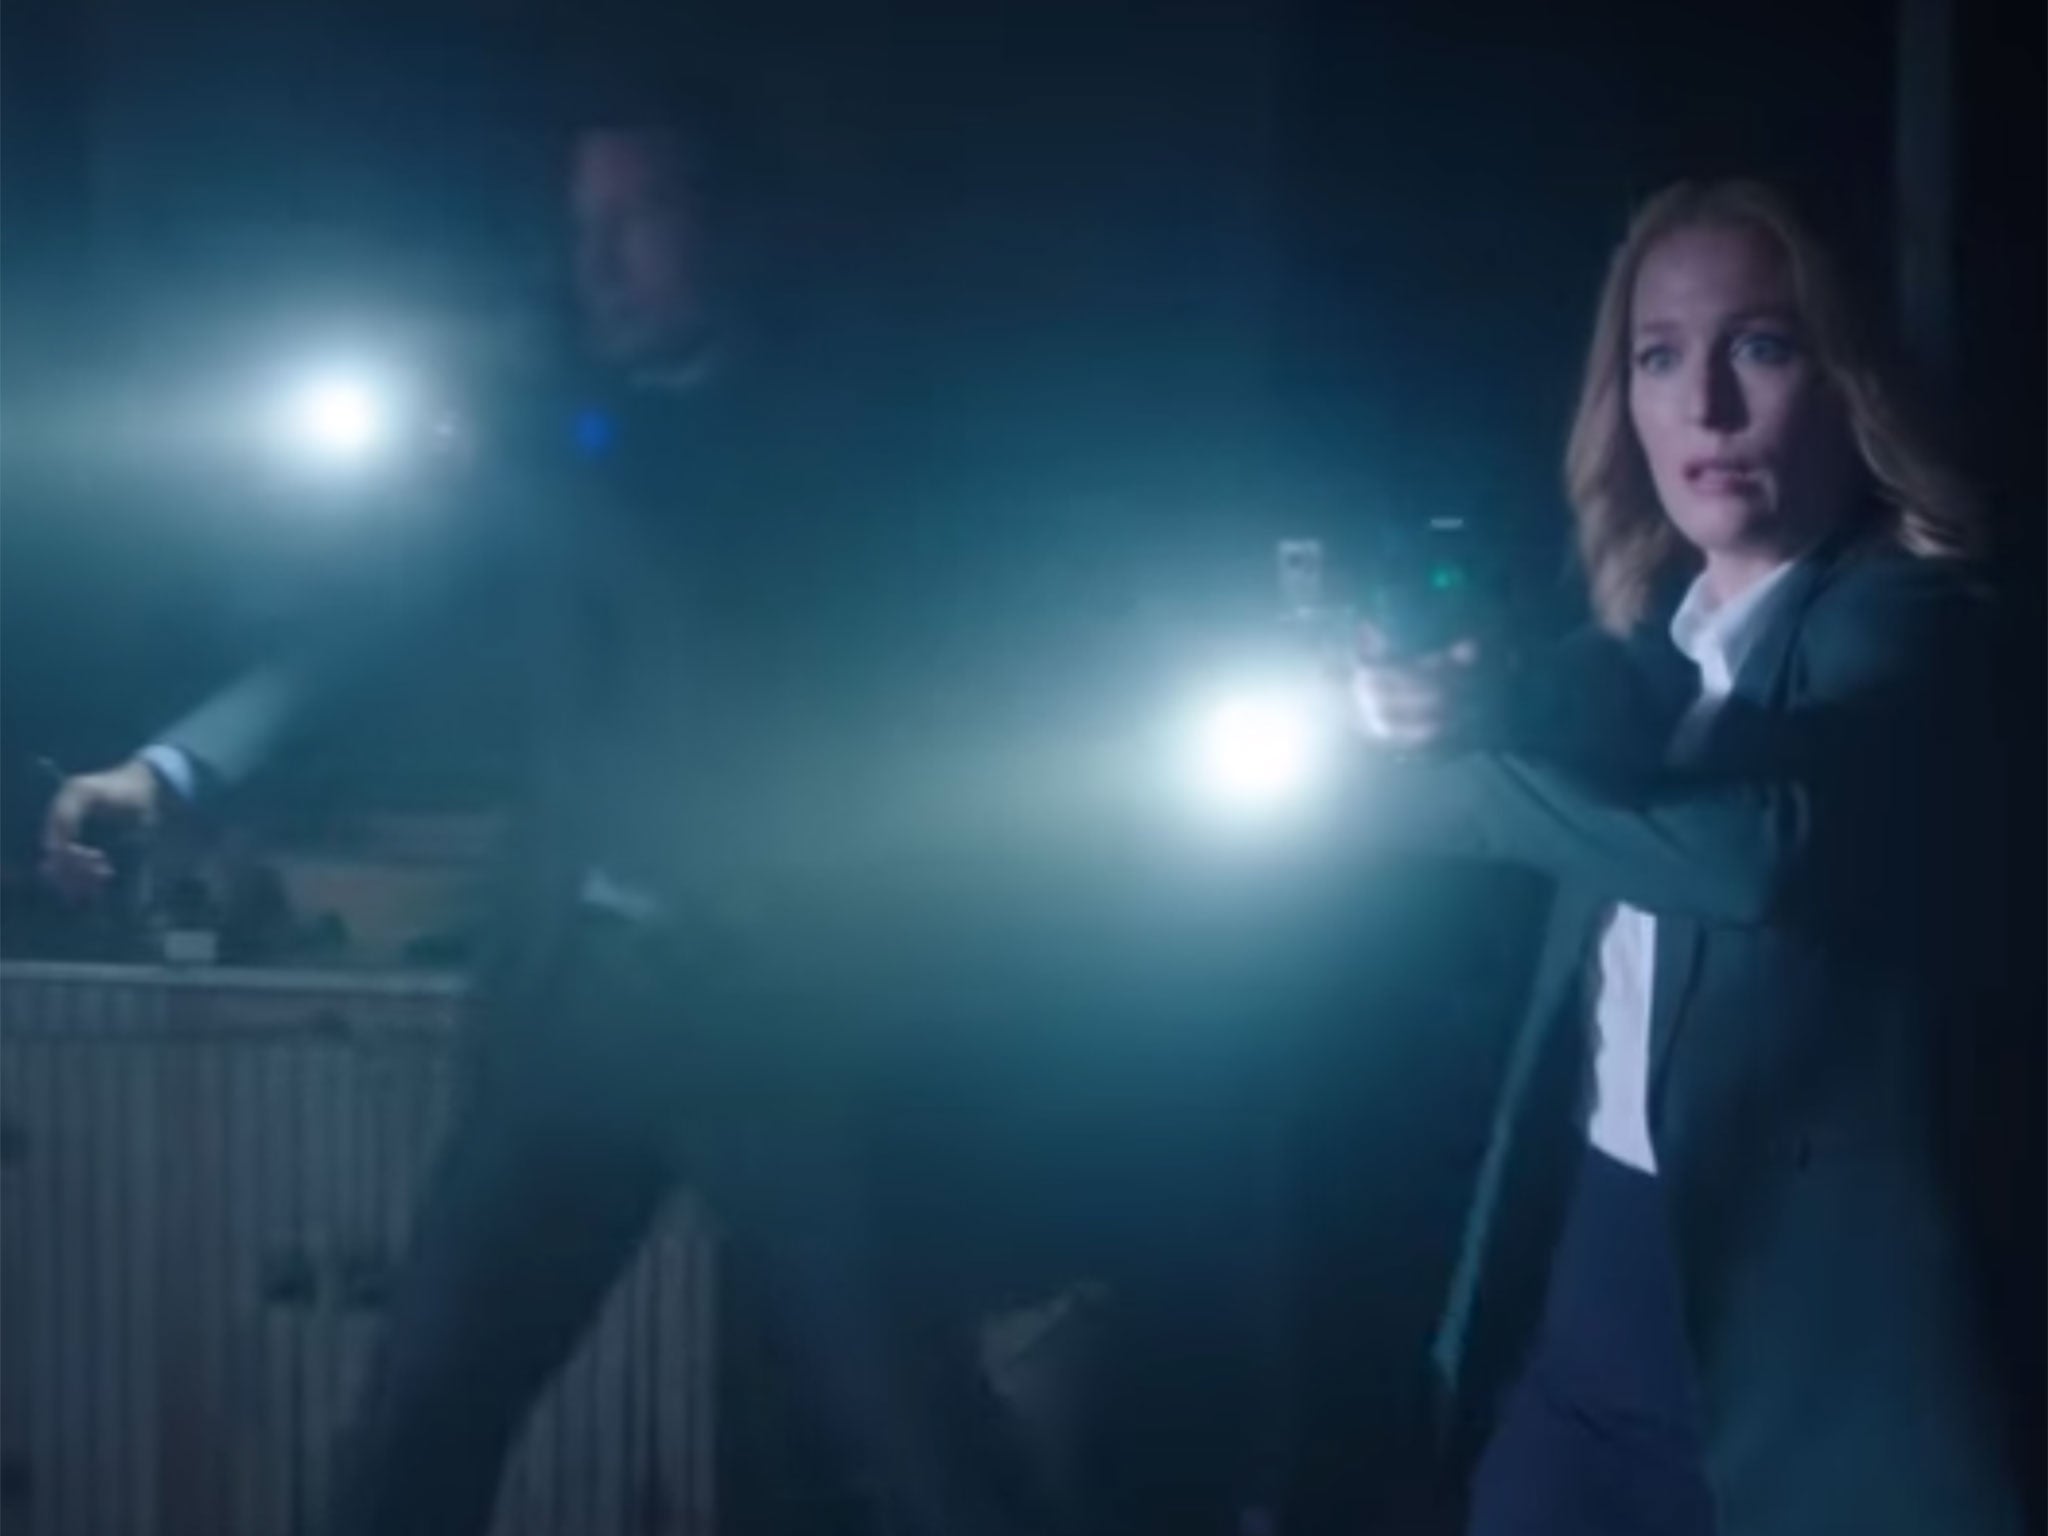 Sculder and Mully are back for The X-Files revival series